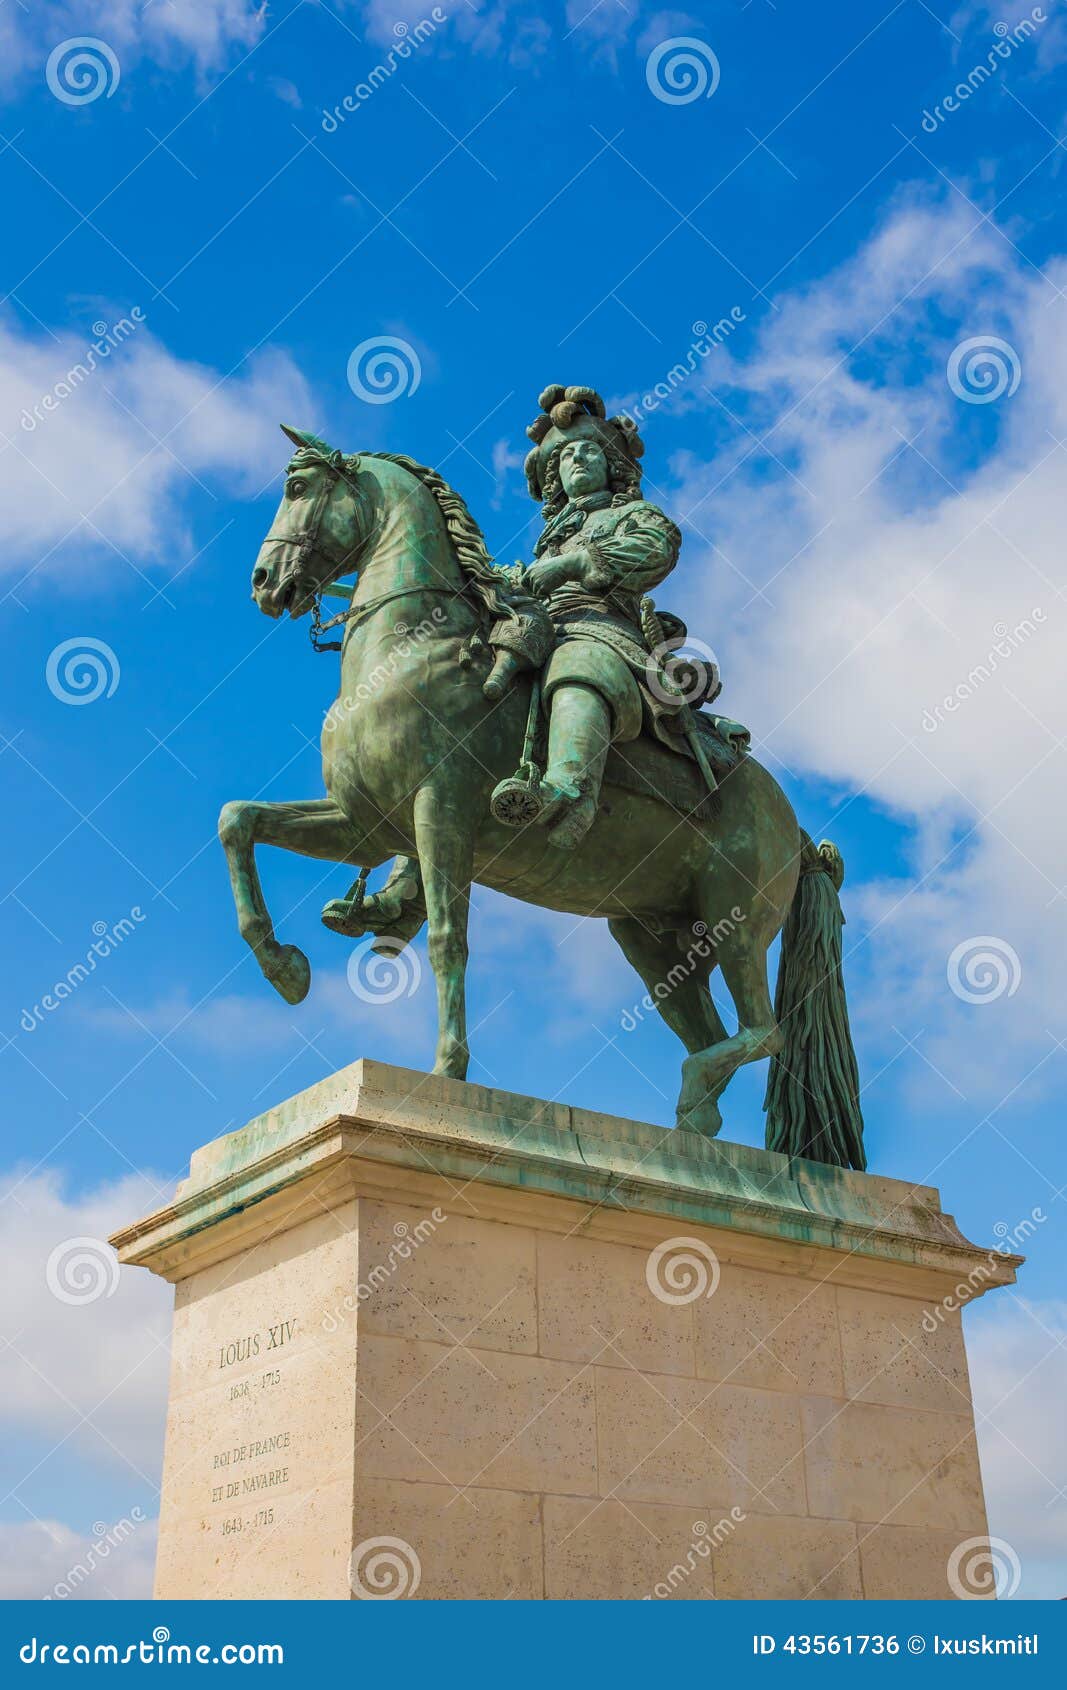 Statue Of Louis XIV, Sun King Of France In Versailles Stock Photo - Image of louis, metal: 43561736